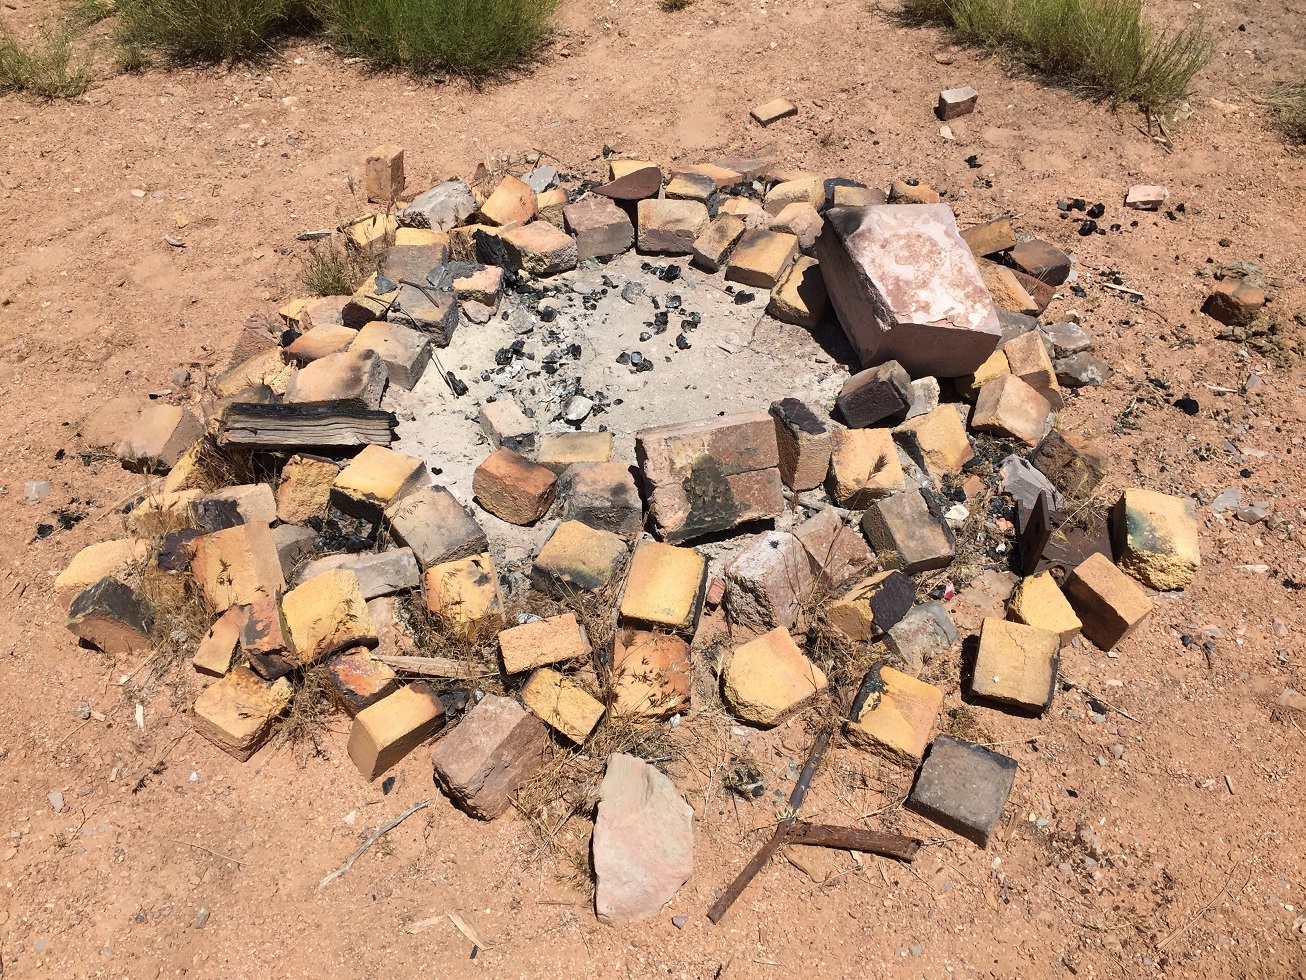 Firepit made from bricks out of the old furnace at the Grand Gulch Mine